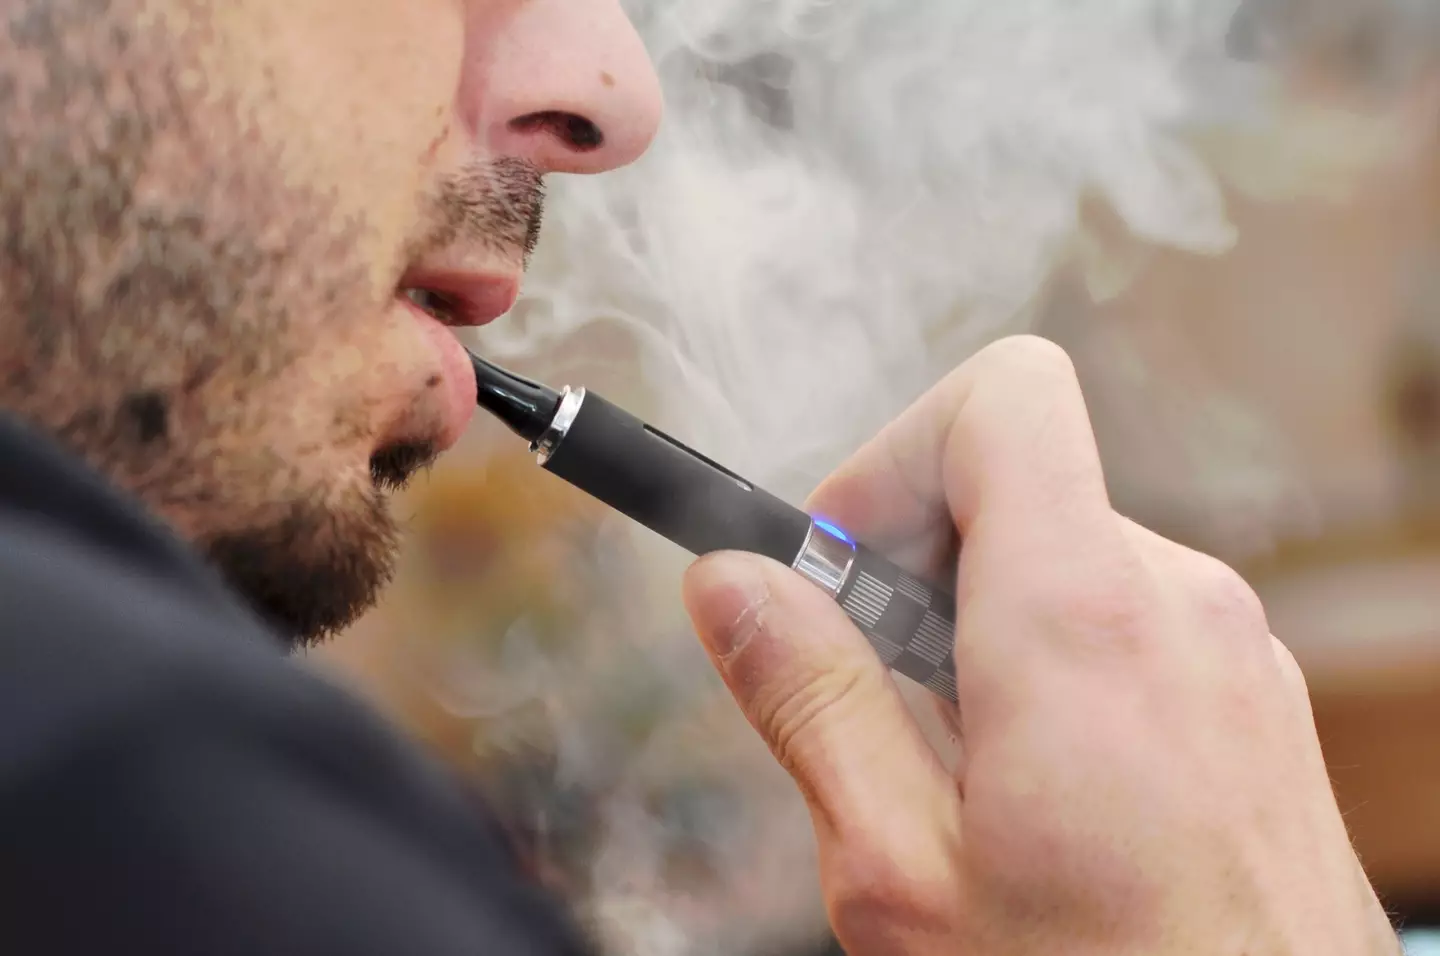 There are numerous health issues that could arise if you kept vaping excessively.